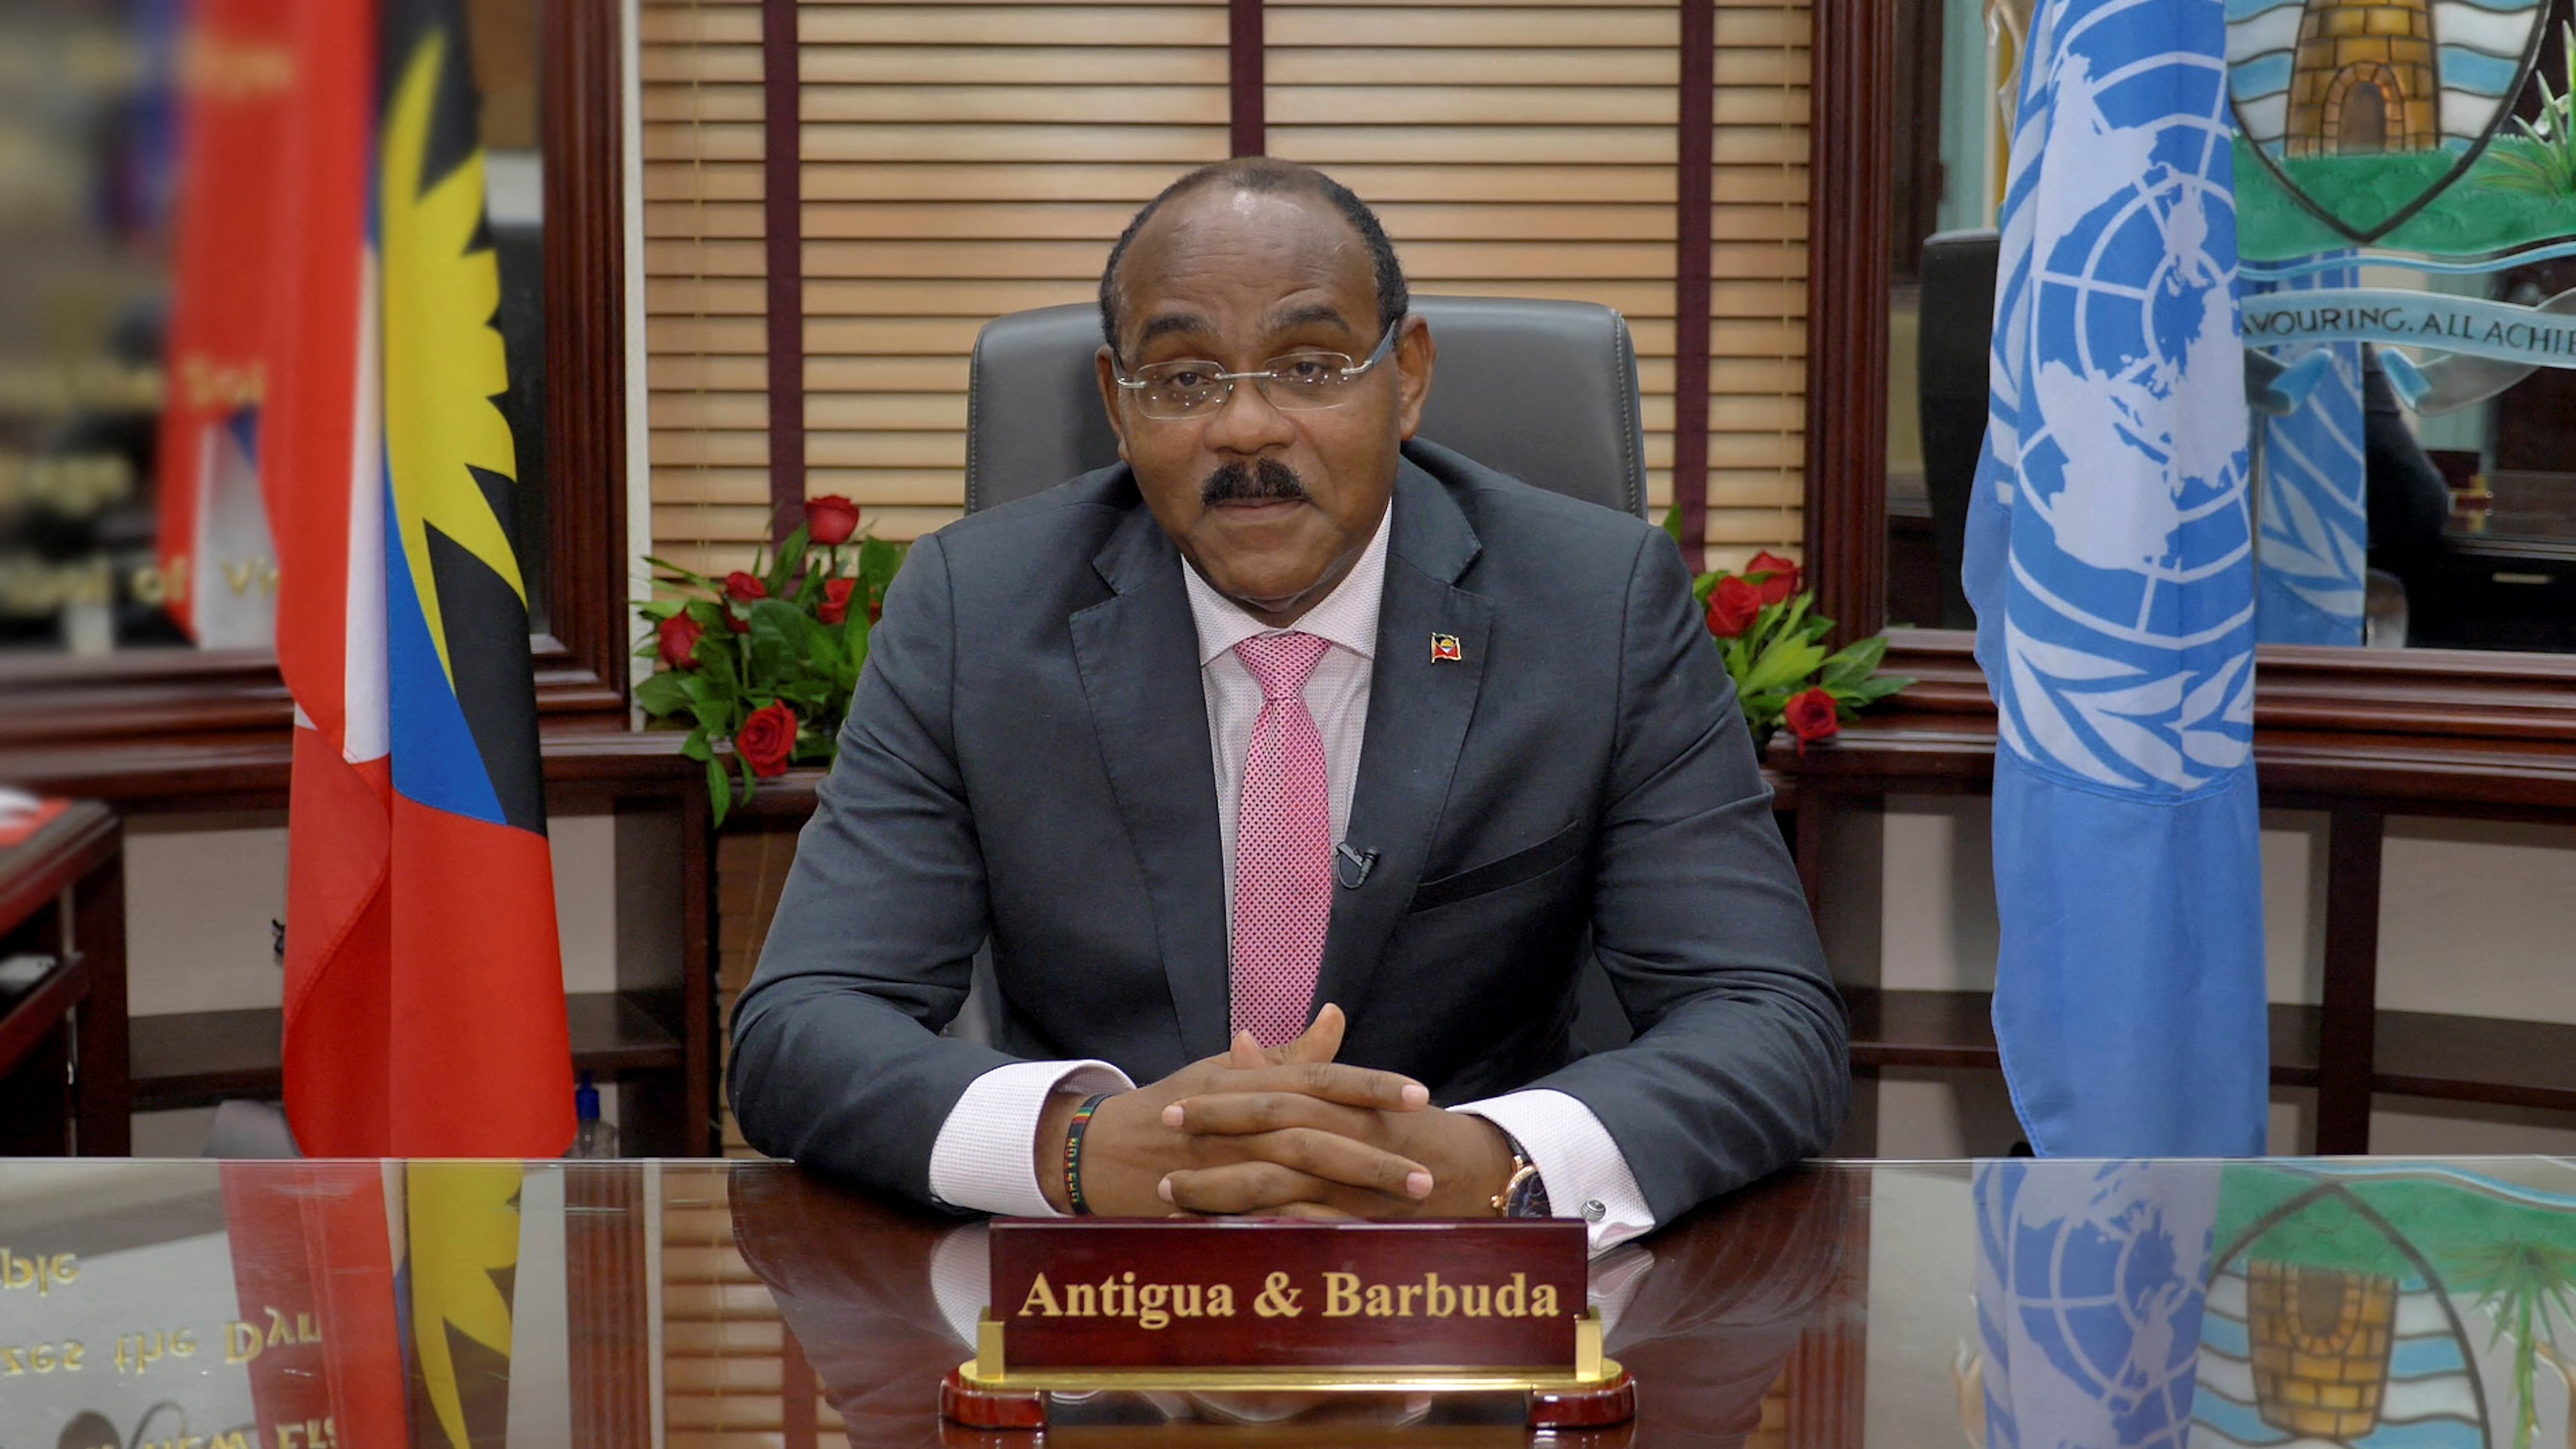 Interview with Antigua and Barbuda's Prime Minister Gaston Browne